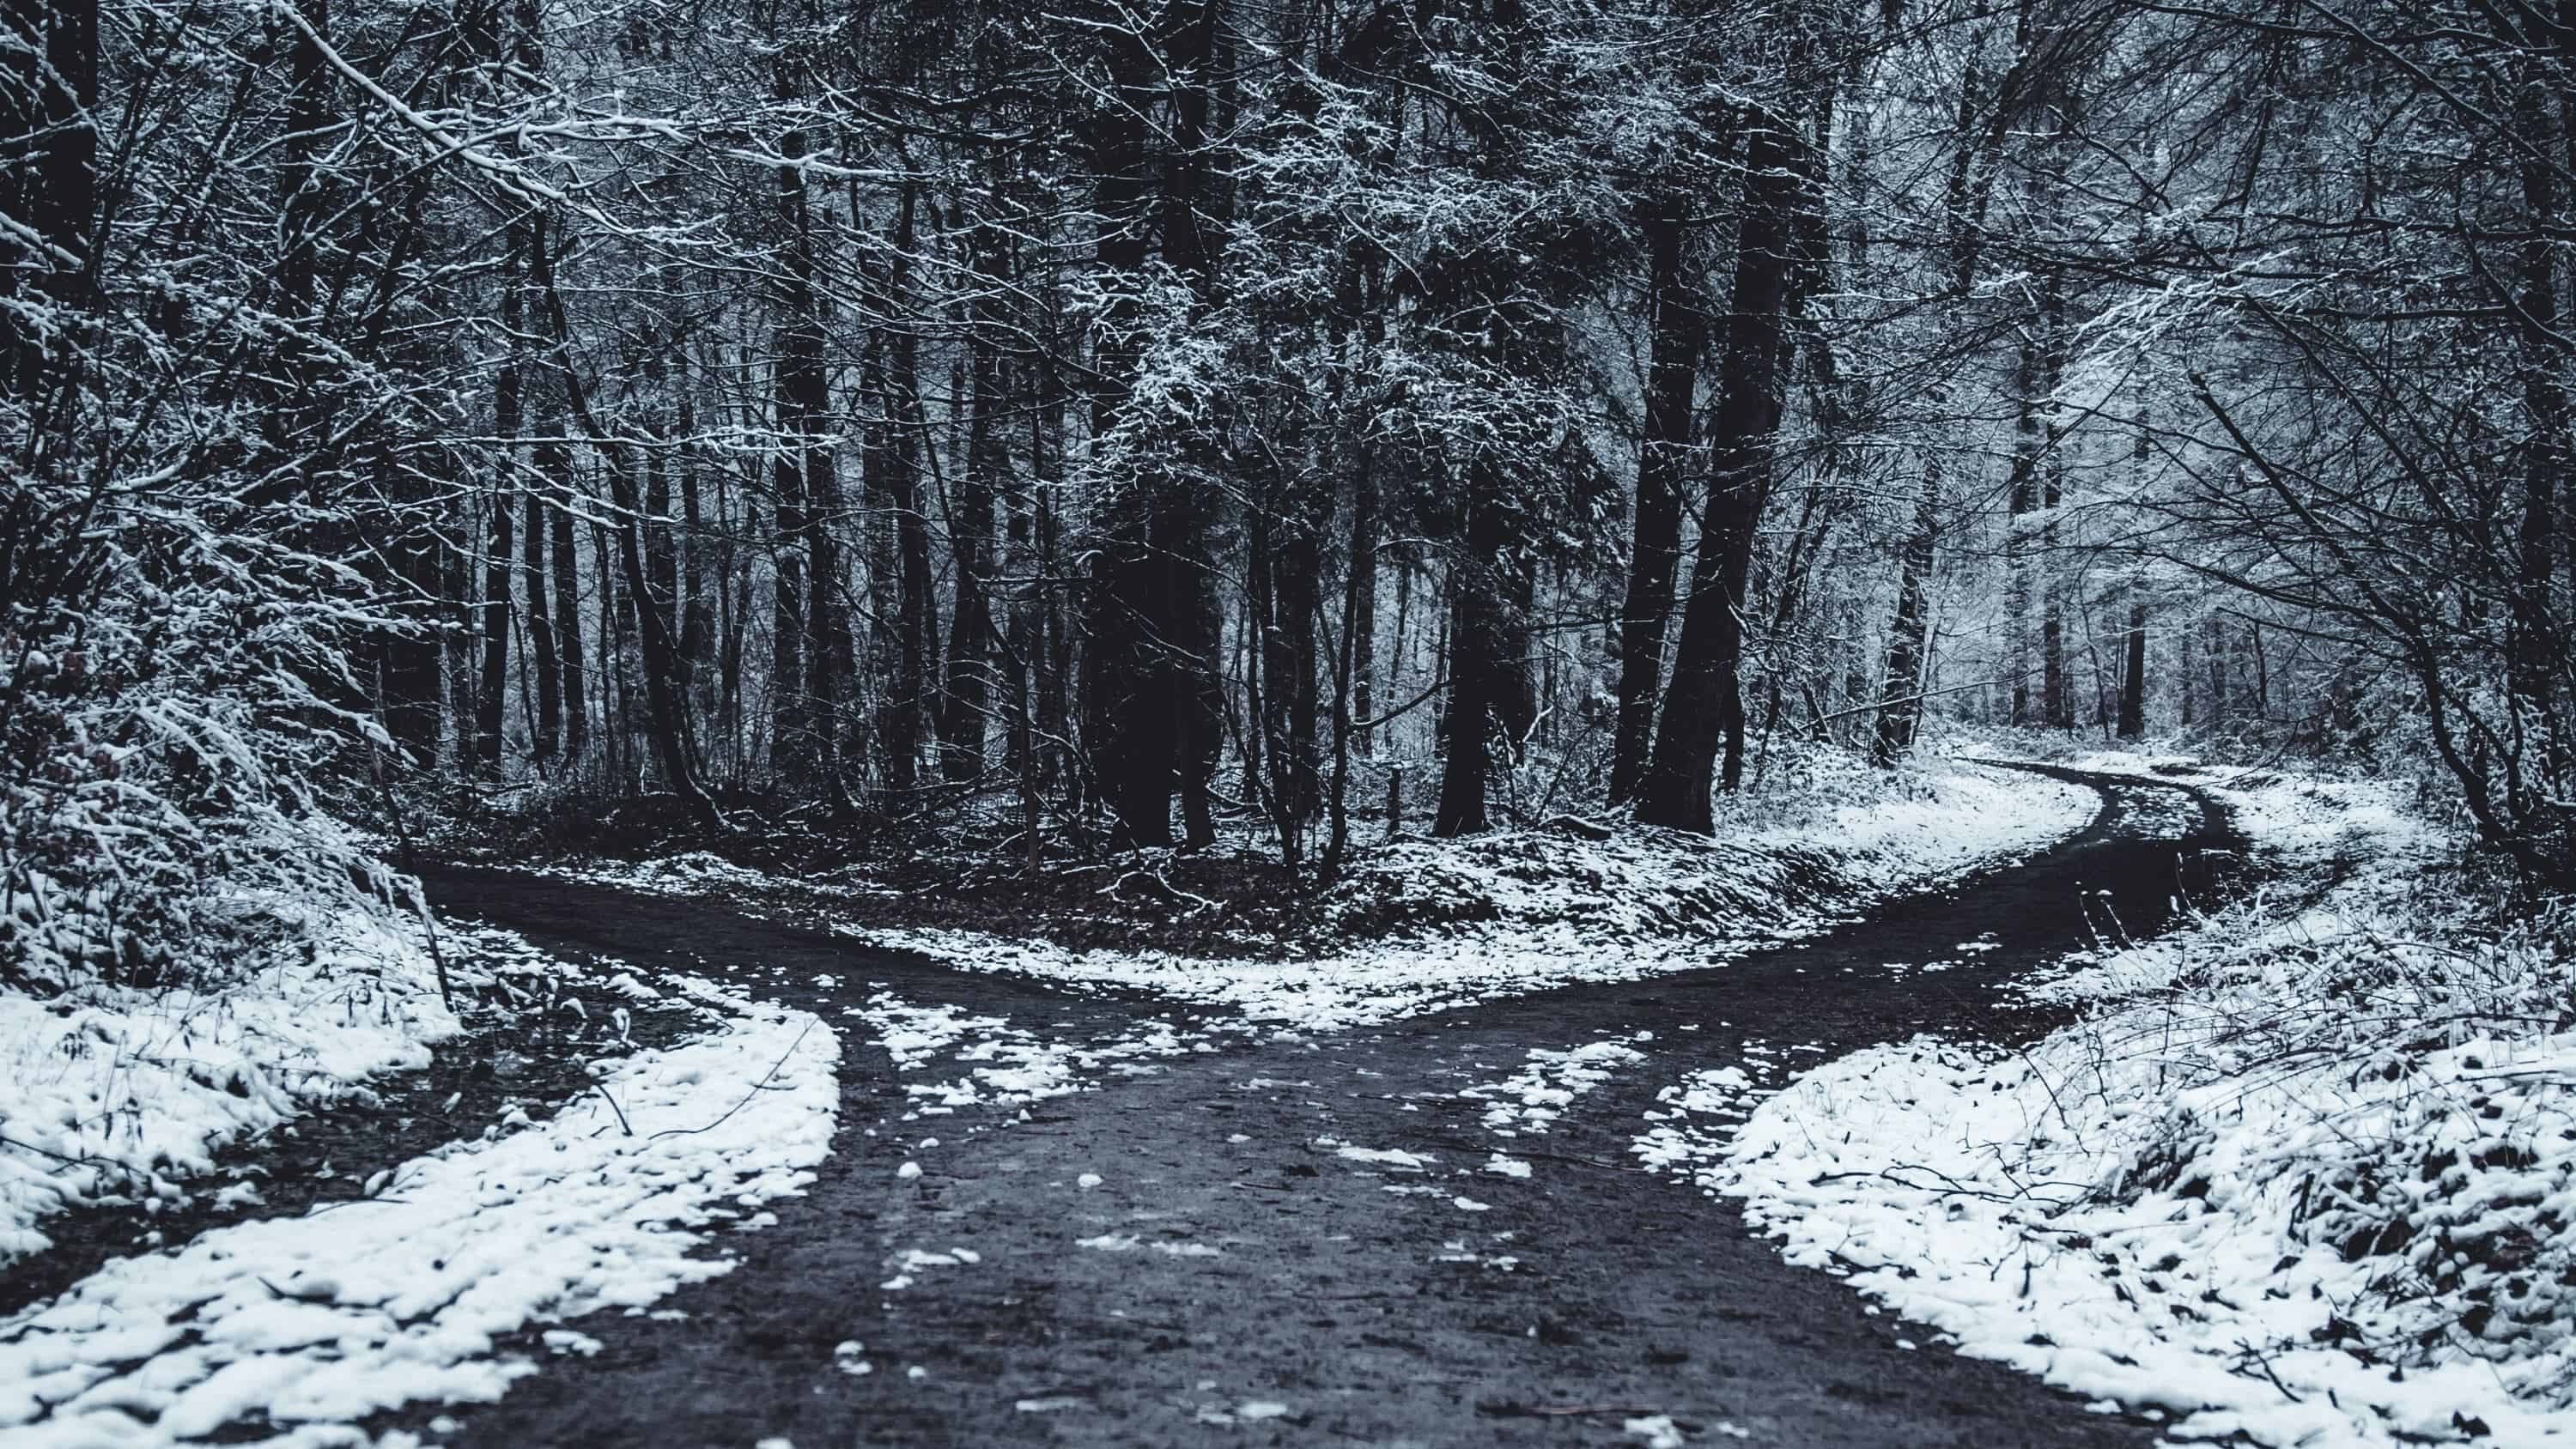 Path diverging in a snowy wood